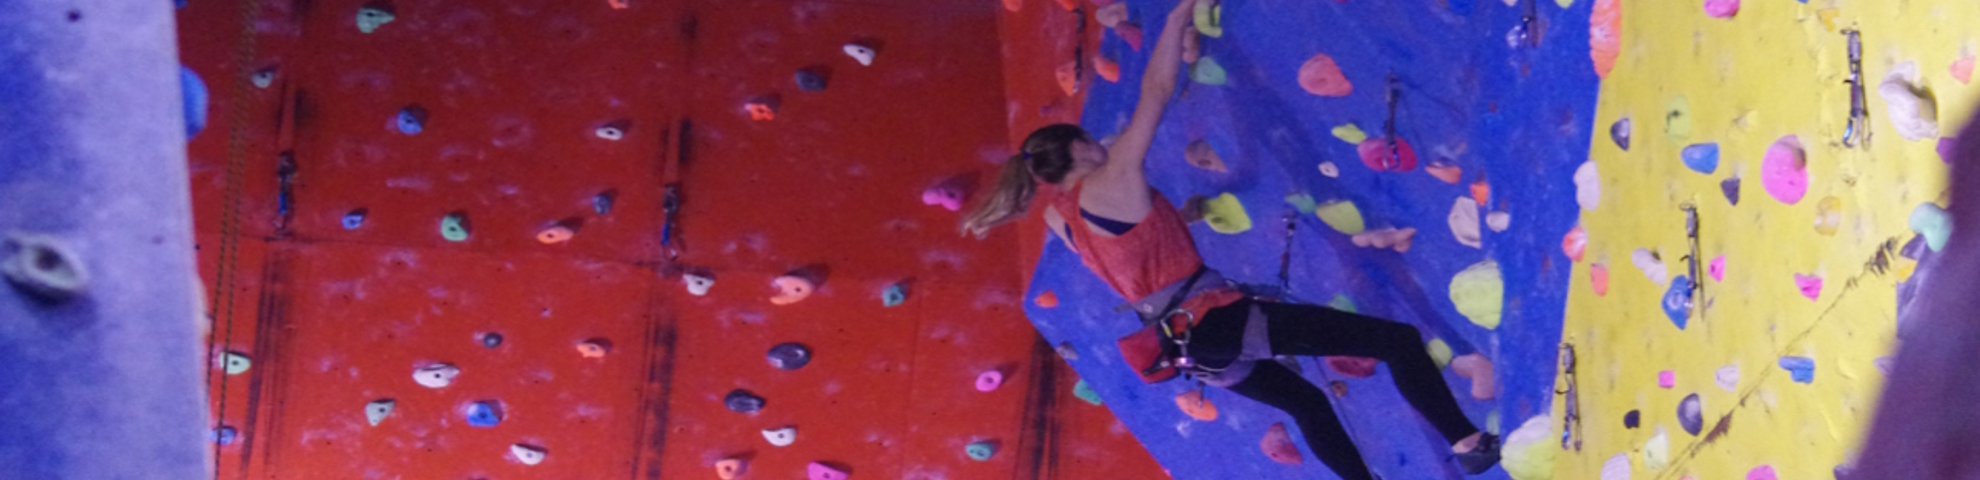 A person with a harness rock climbing a colourful wall.